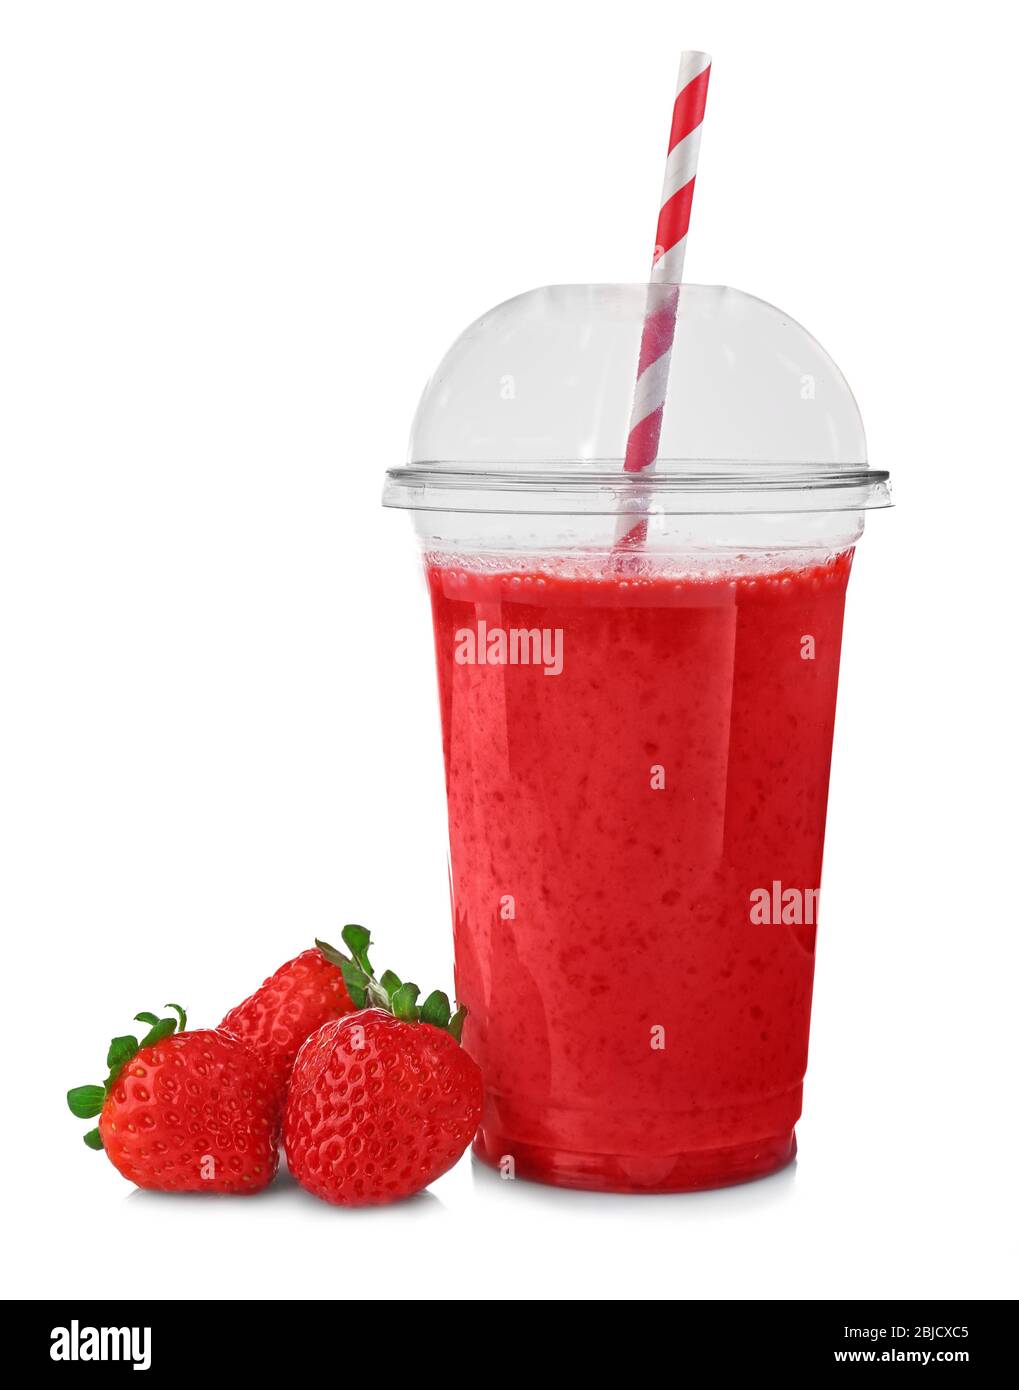 Strawberry Milkshake In Takeaway Cup And Straw Isolated On White